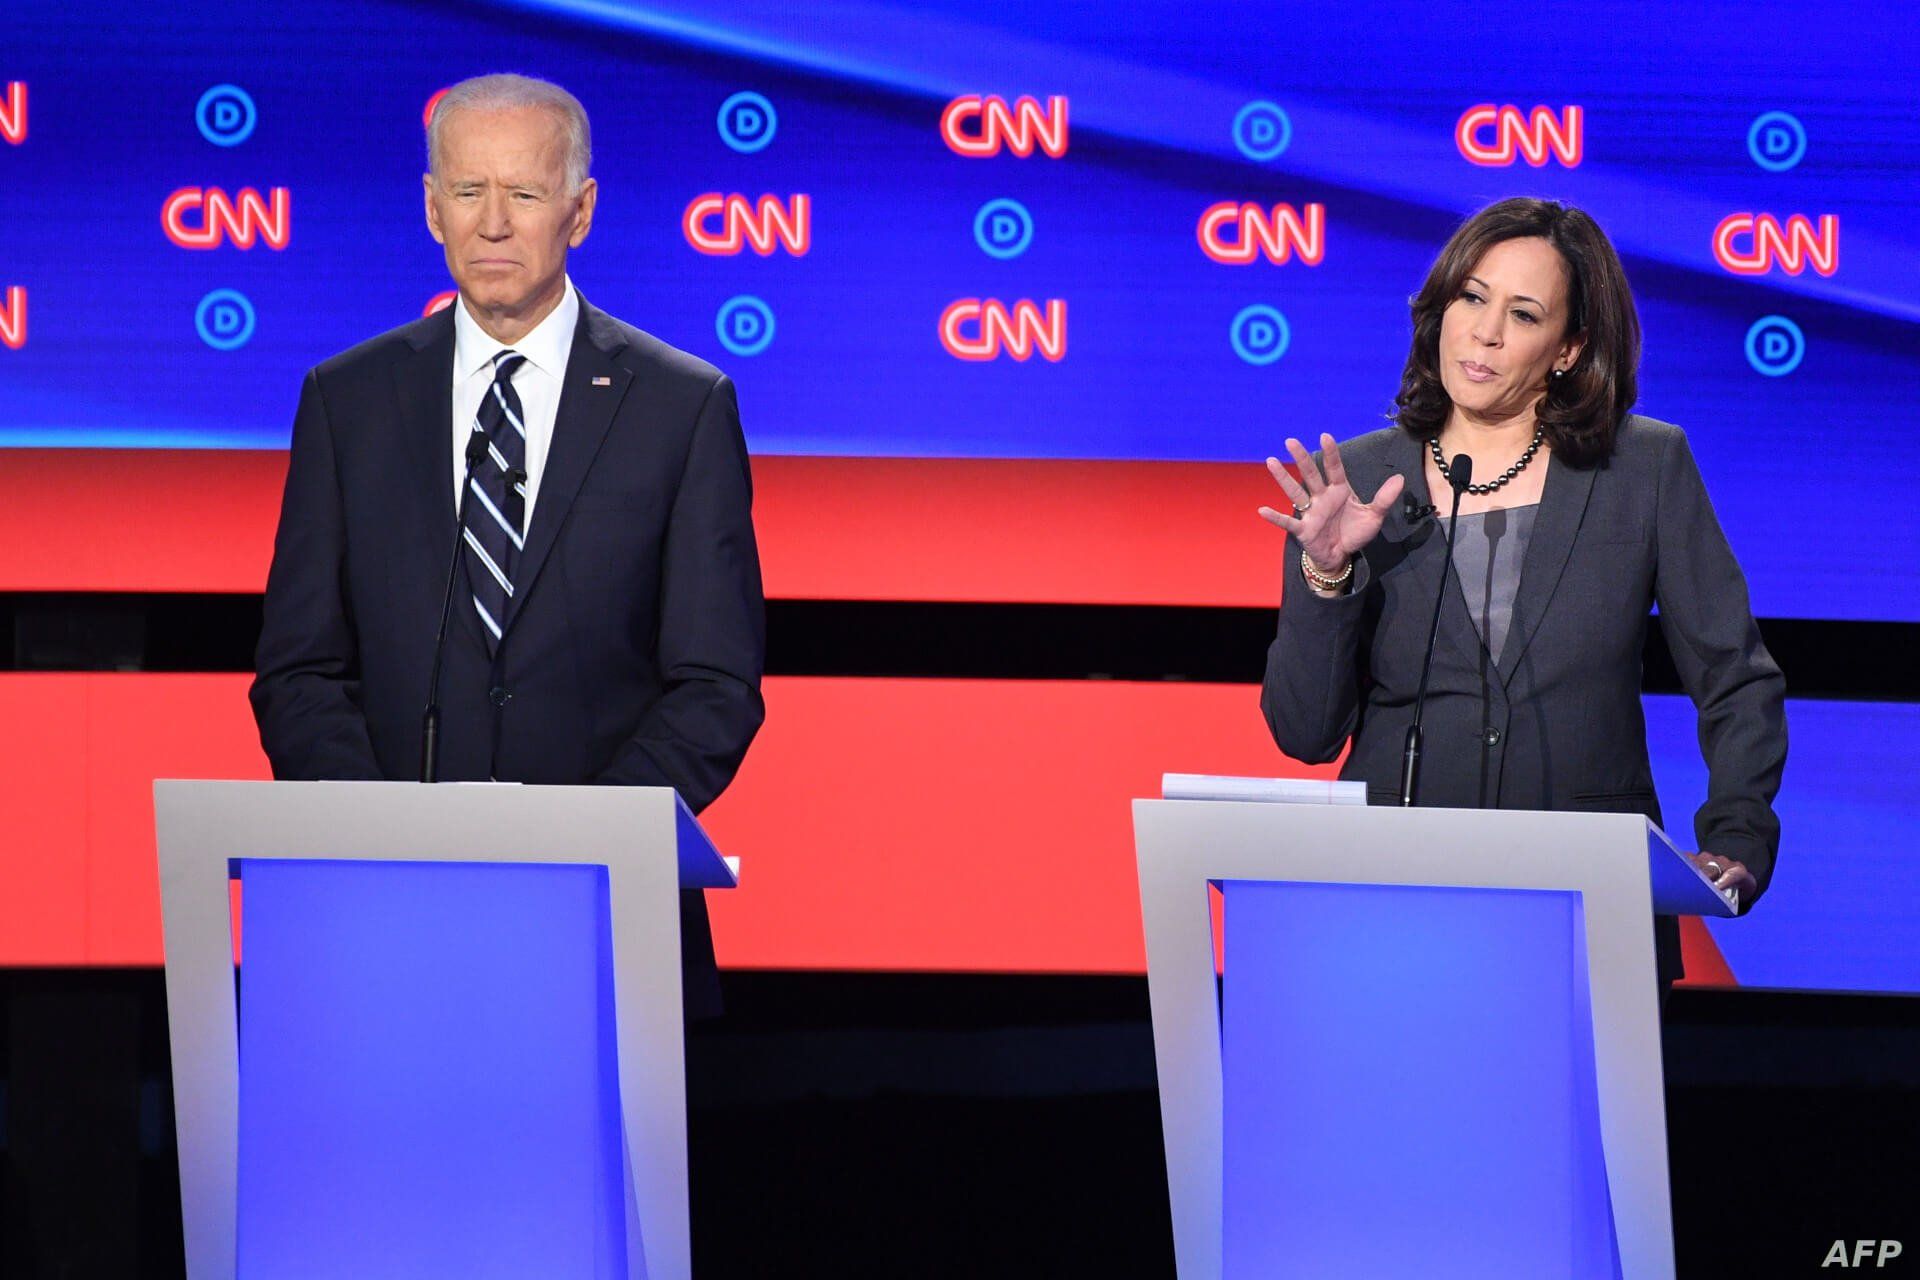  Democratic presidential hopeful U.S. Senator from California Kamala Harris, right, delivers her closing statement flanked by former Vice President Joe Biden during the Democratic primary debate hosted by CNN at the Fox Theatre in Detroit, July 31, 2019. 